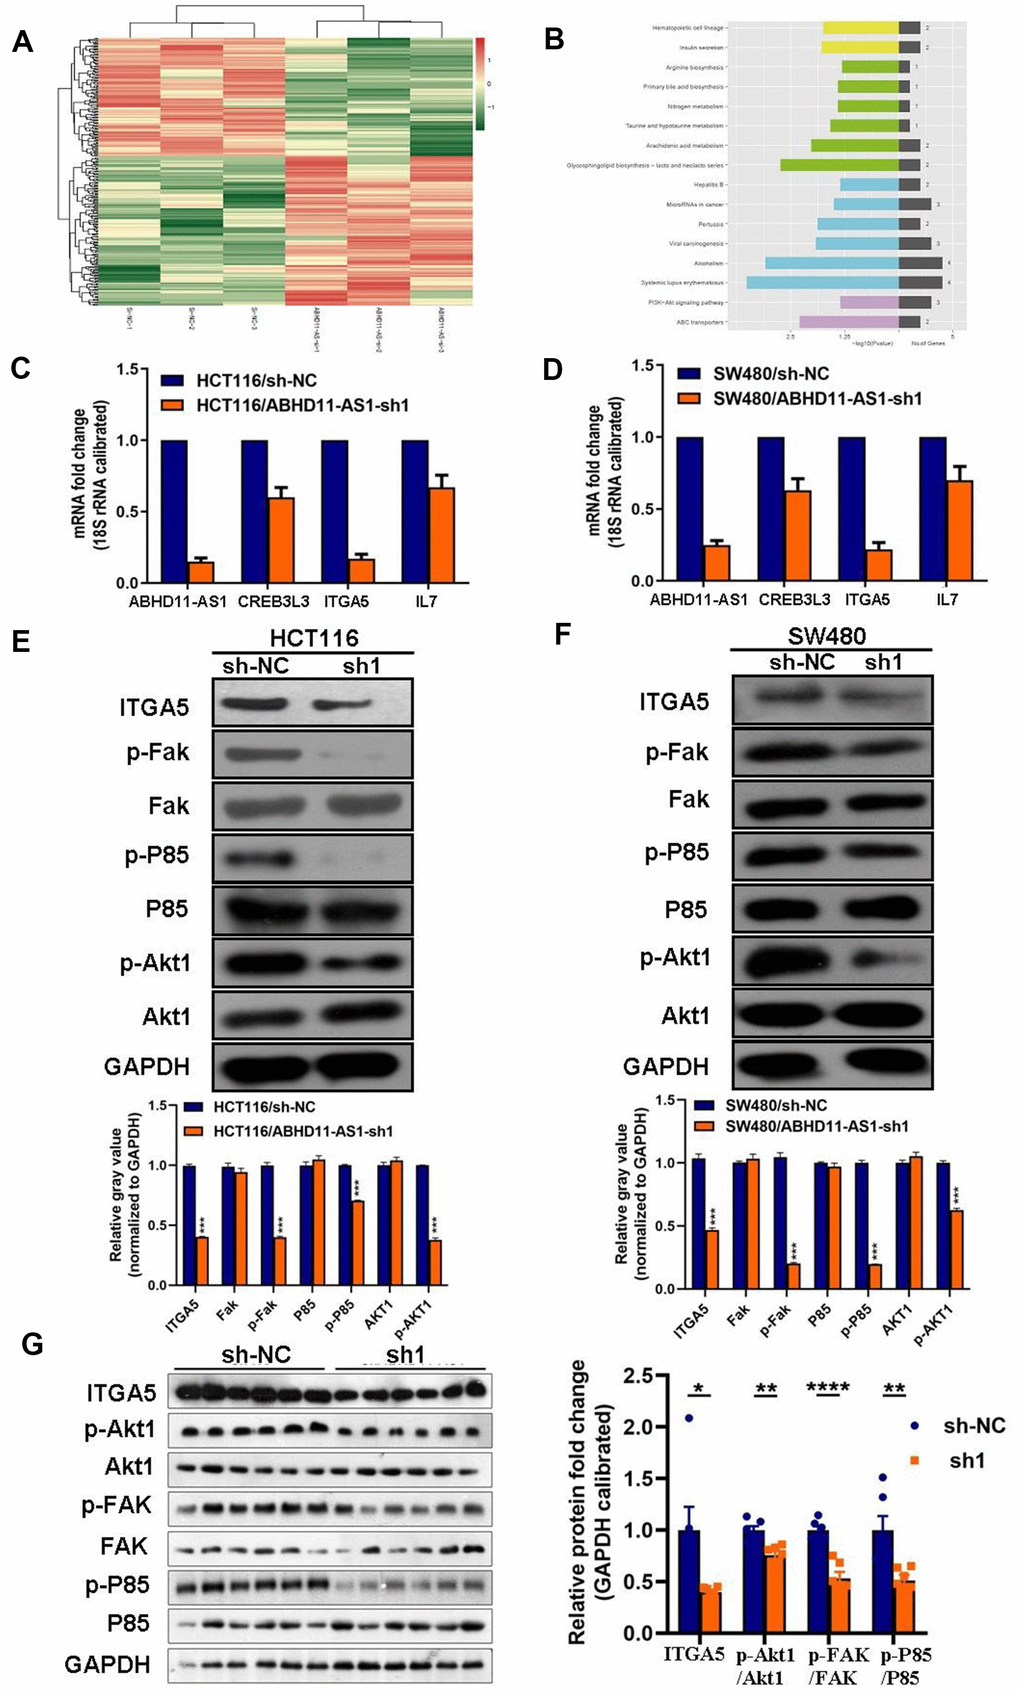 ABHD11-AS1 deficiency inhibited ITGA5/Fak/PI3K/Akt signaling pathway in CRC. (A) mRNA sequencing to find differential genes between HCT116-sh-NC cells and ABHD11-AS1 deficient cells and displayed via Heat-map. (B) Differential genes enriched by KEGG pathway. Top 16 pathways were illustrated. (C) RT-qPCR to detect mRNA expression of ITGA5, CREB3L3, ITGA5, IL7 in HCT116 cells and ABHD11-AS1 deficient cells. (D) RT-qPCR to detect mRNA expression of ITGA5, CREB3L3, ITGA5, IL7 in SW480 cells and SW480 ABHD11-AS1 deficient cells. (E) WB analysis of protein abundance of ITGA5, FAK, p-FAK, P85, p-P85, Akt1, p-Akt1 in HCT116 cells and HCT116 ABHD11-AS1 deficient cells. (F) WB analysis of protein abundance of ITGA5, FAK, p-FAK, P85, p-P85, Akt1, p-Akt1 in SW480 cells and SW480 ABHD11-AS1 deficient cells. (G) WB analysis of protein abundance of ITGA5, FAK, p-FAK, P85, p-P85, Akt1, p-Akt1 in tumor tissues of nude mice. ***P